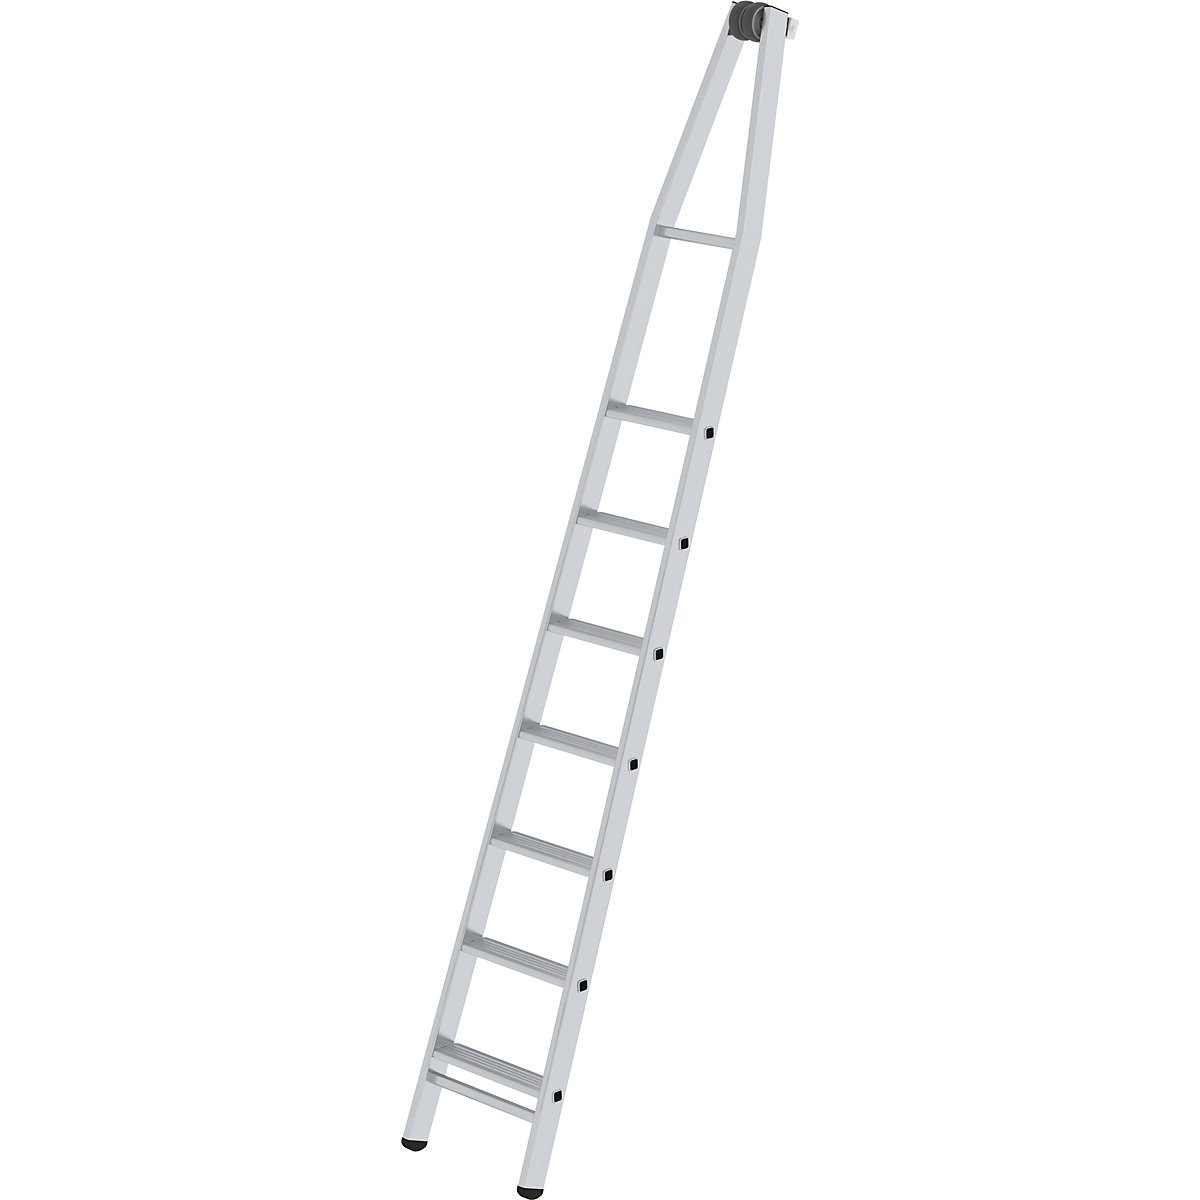 Glass cleaner step ladder – MUNK, components of top section, 7 steps-1